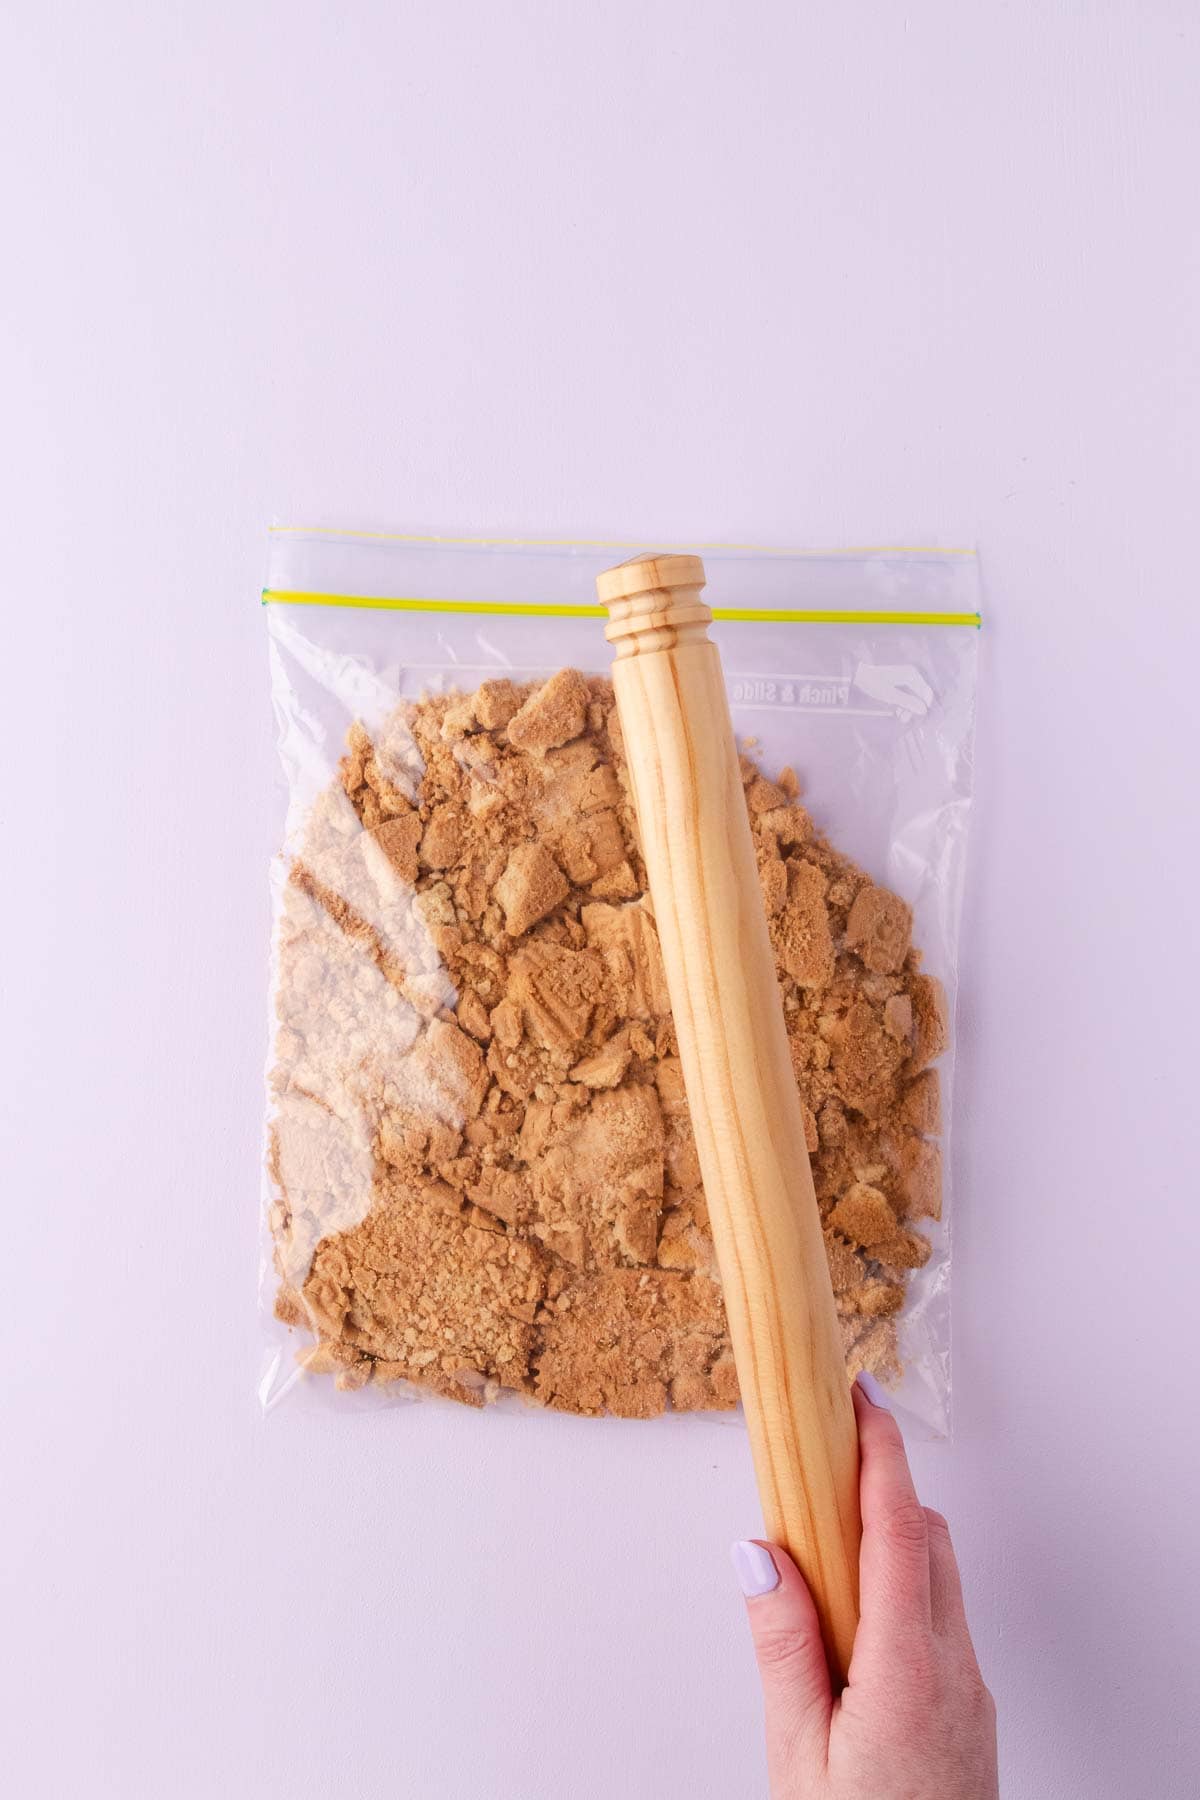 Plain biscuits in a resealable plastic bag, being crushed into small pieces with a wooden rolling pin.